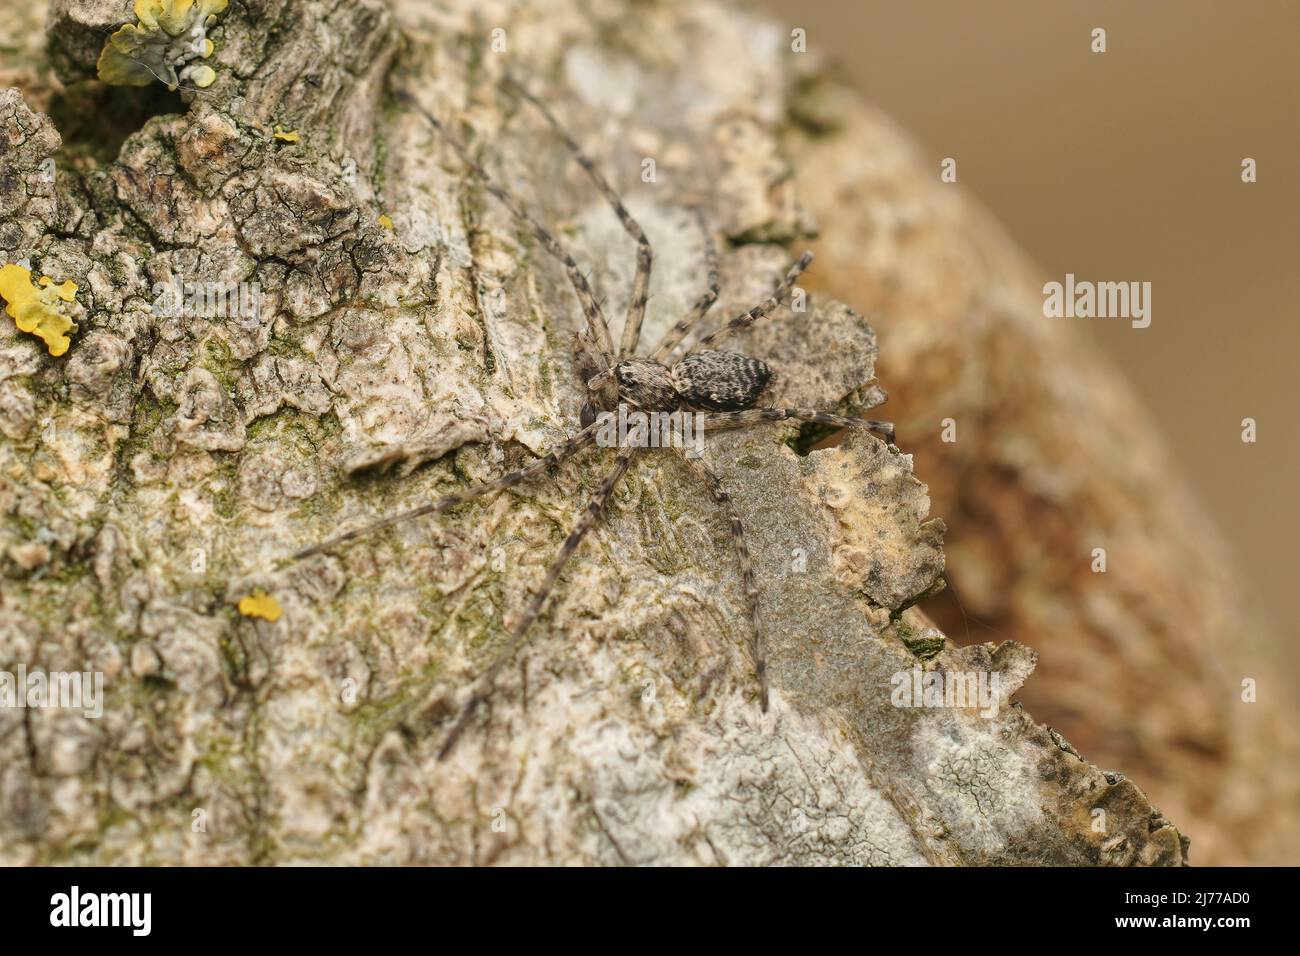 Closeup on a well camouflaged crab spider, Philodromus margaritatus on a gey tree trunk Stock Photo